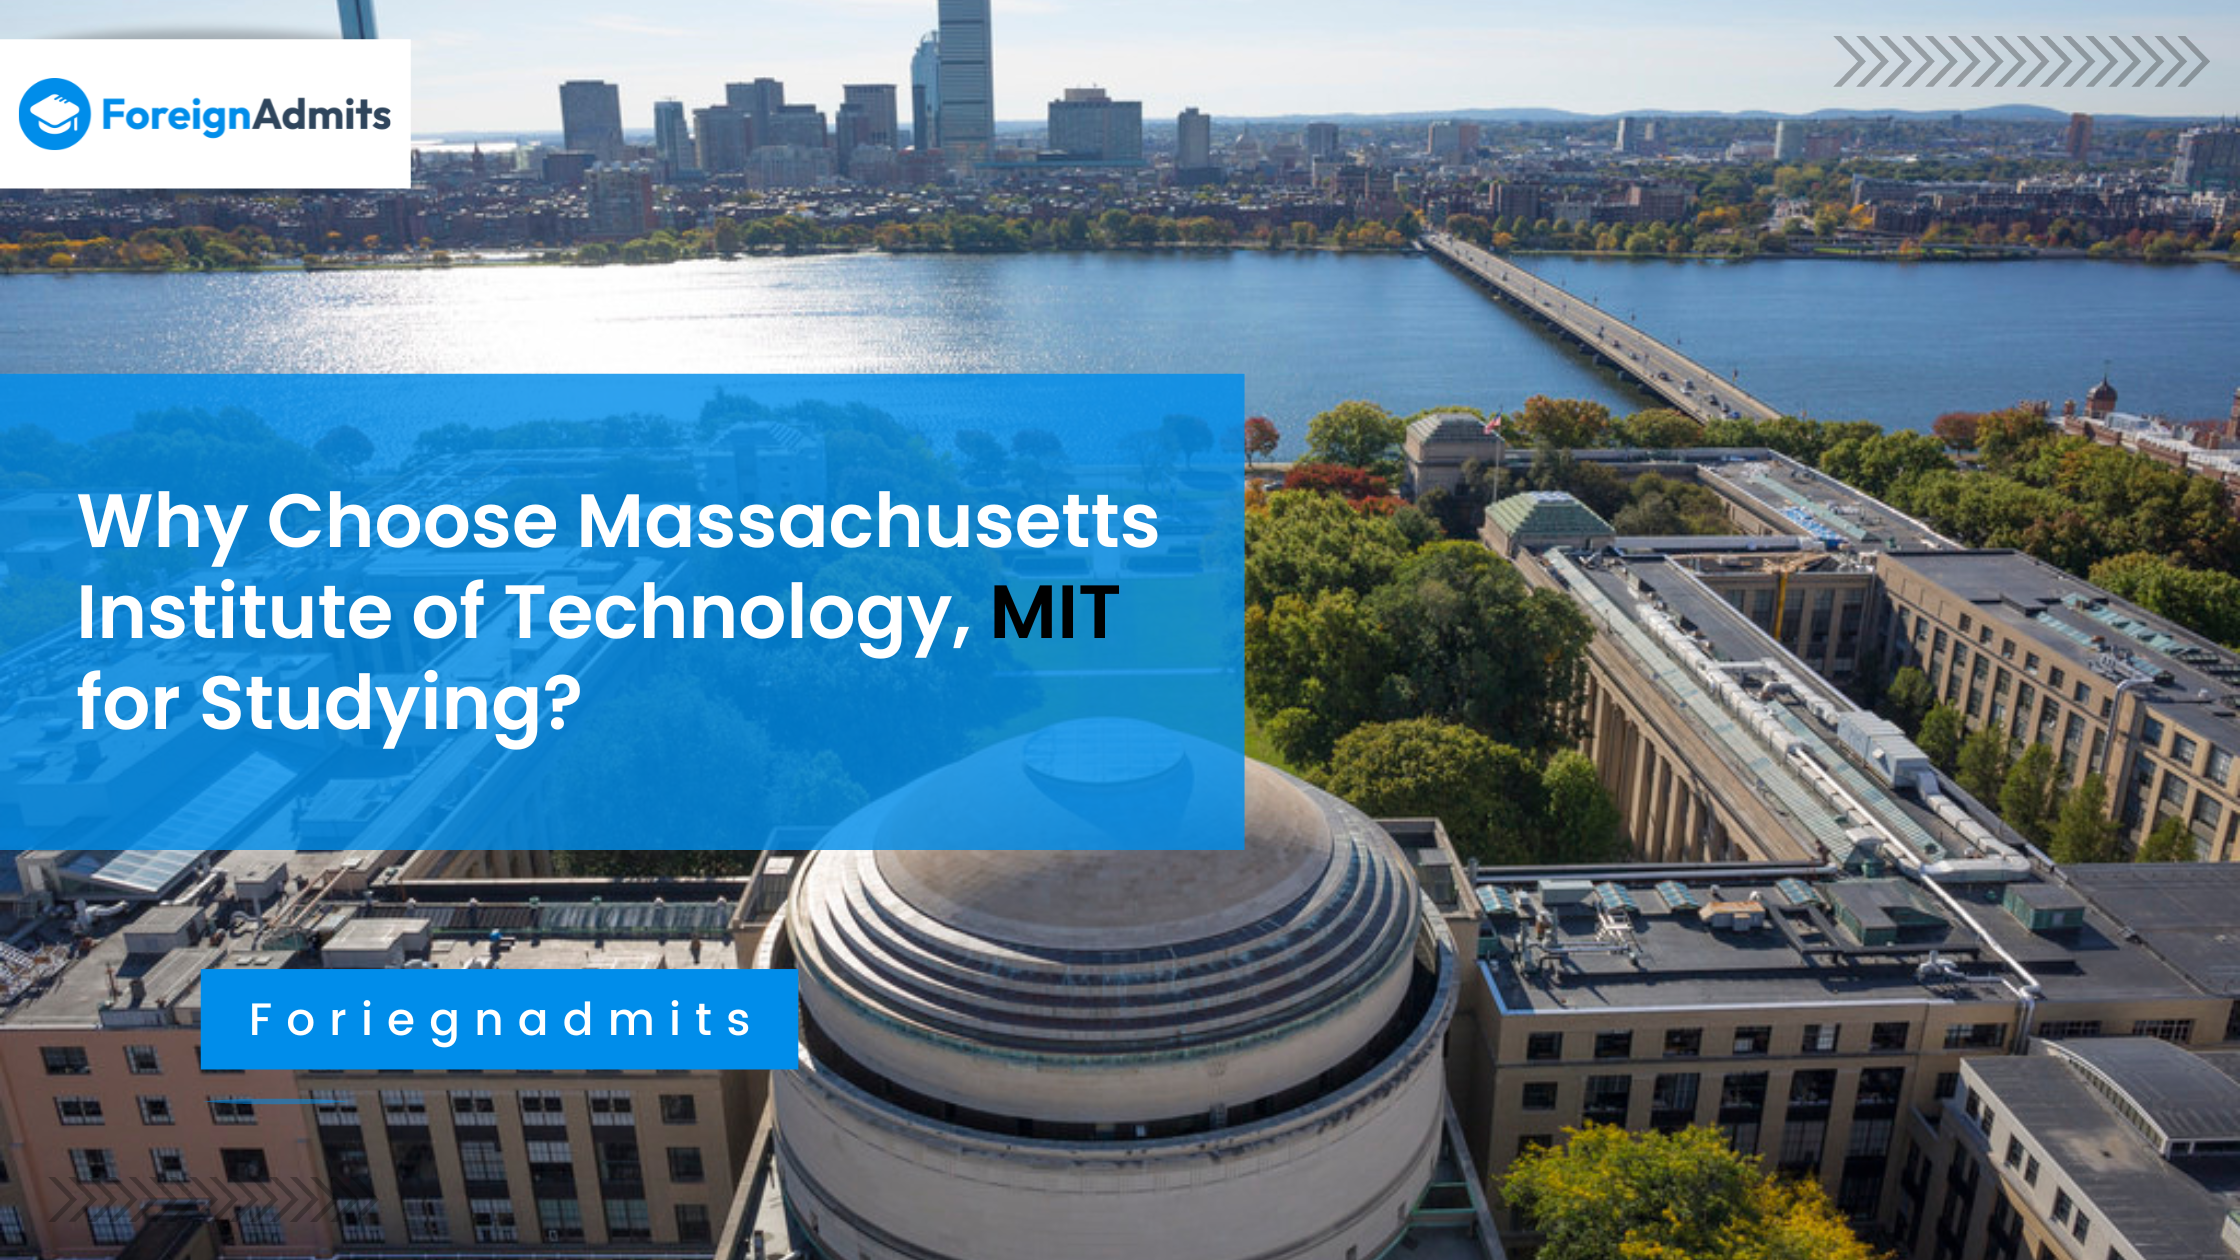 Why Choose Massachusetts Institute of Technology,MIT for Studying?